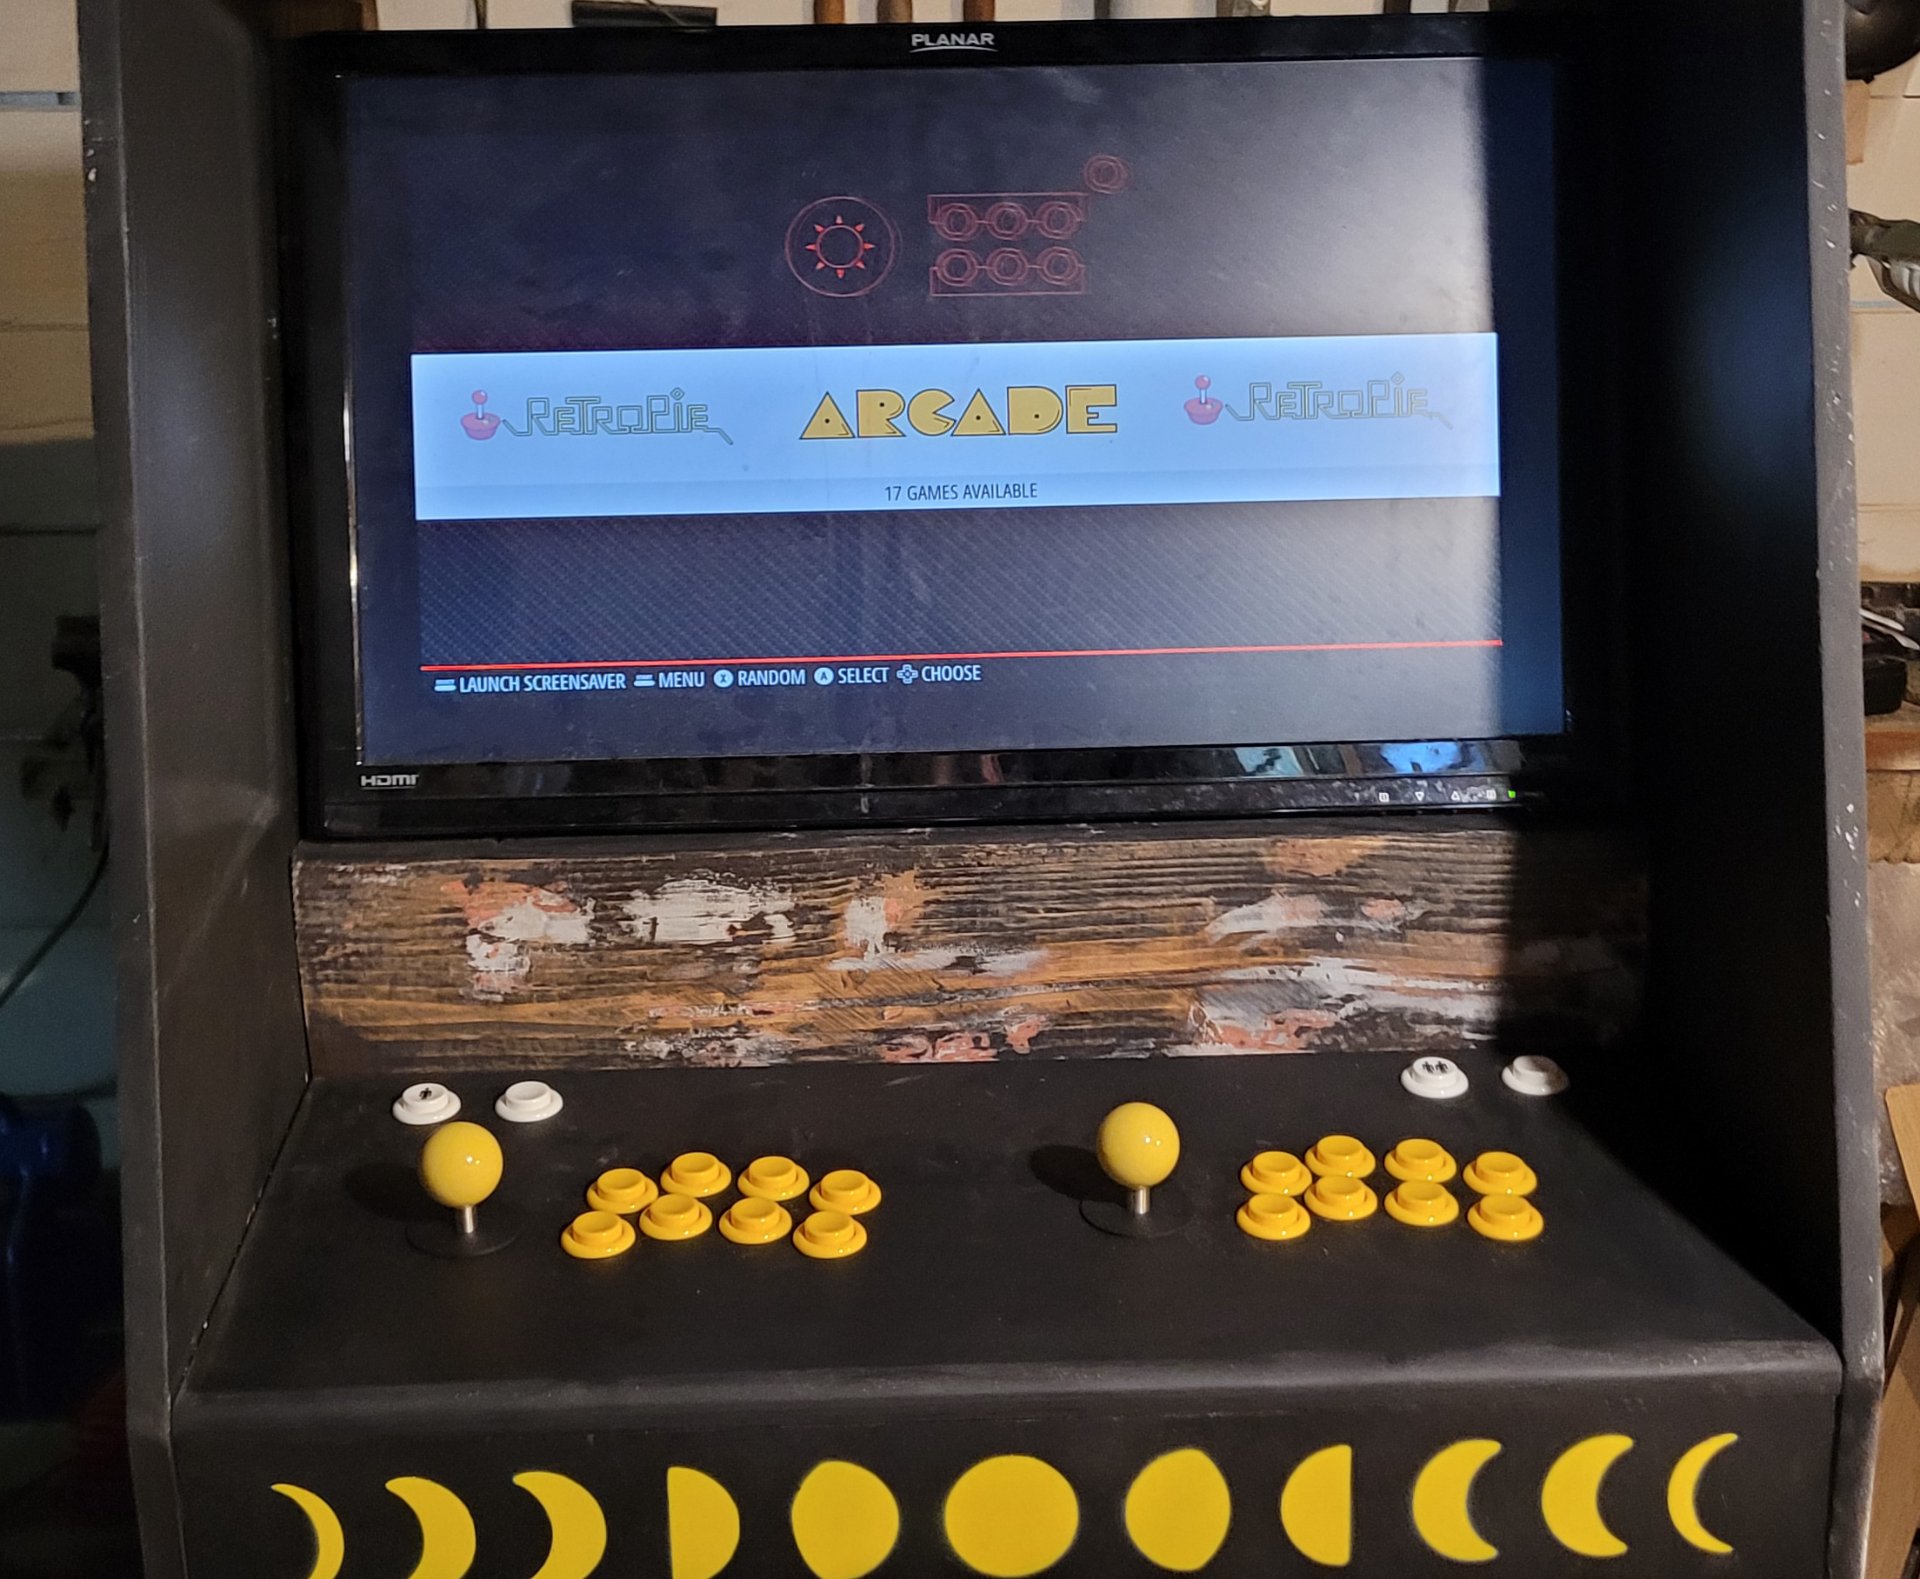 the cab with the screen showing the retropie home page